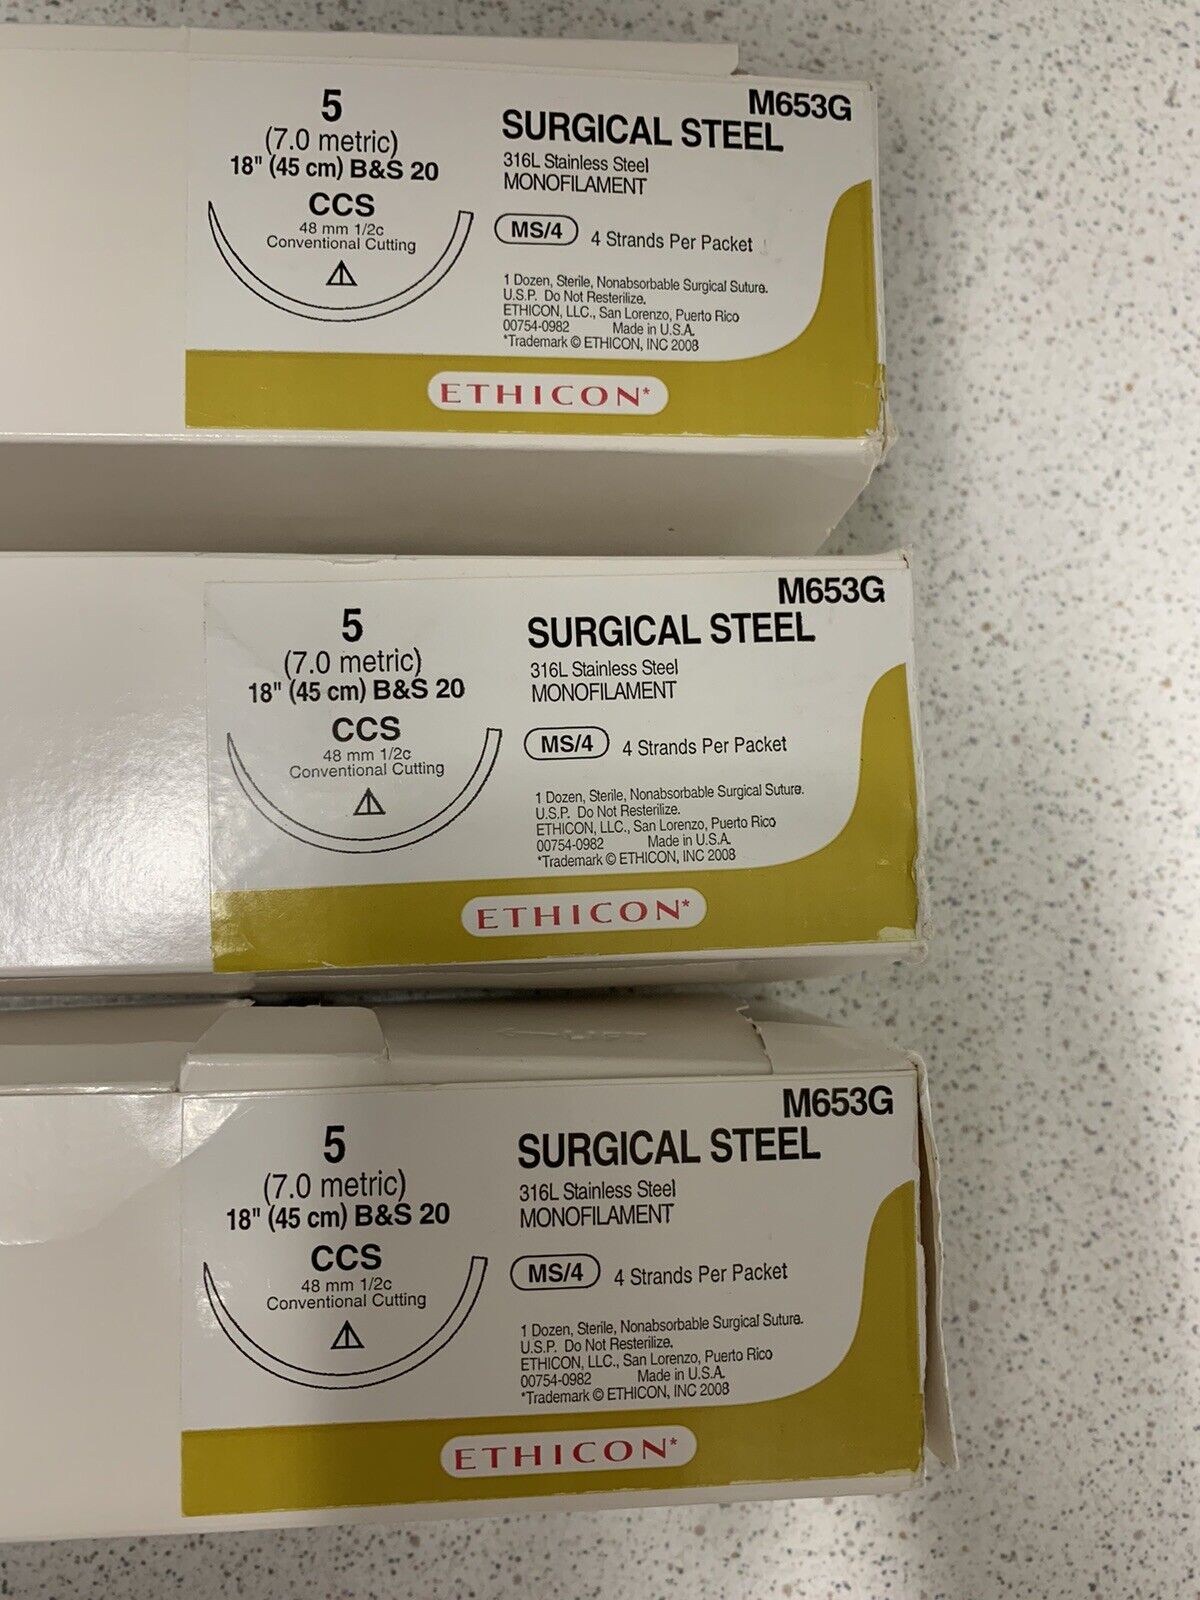 ETHICON Surgical Steel Sutures M653G